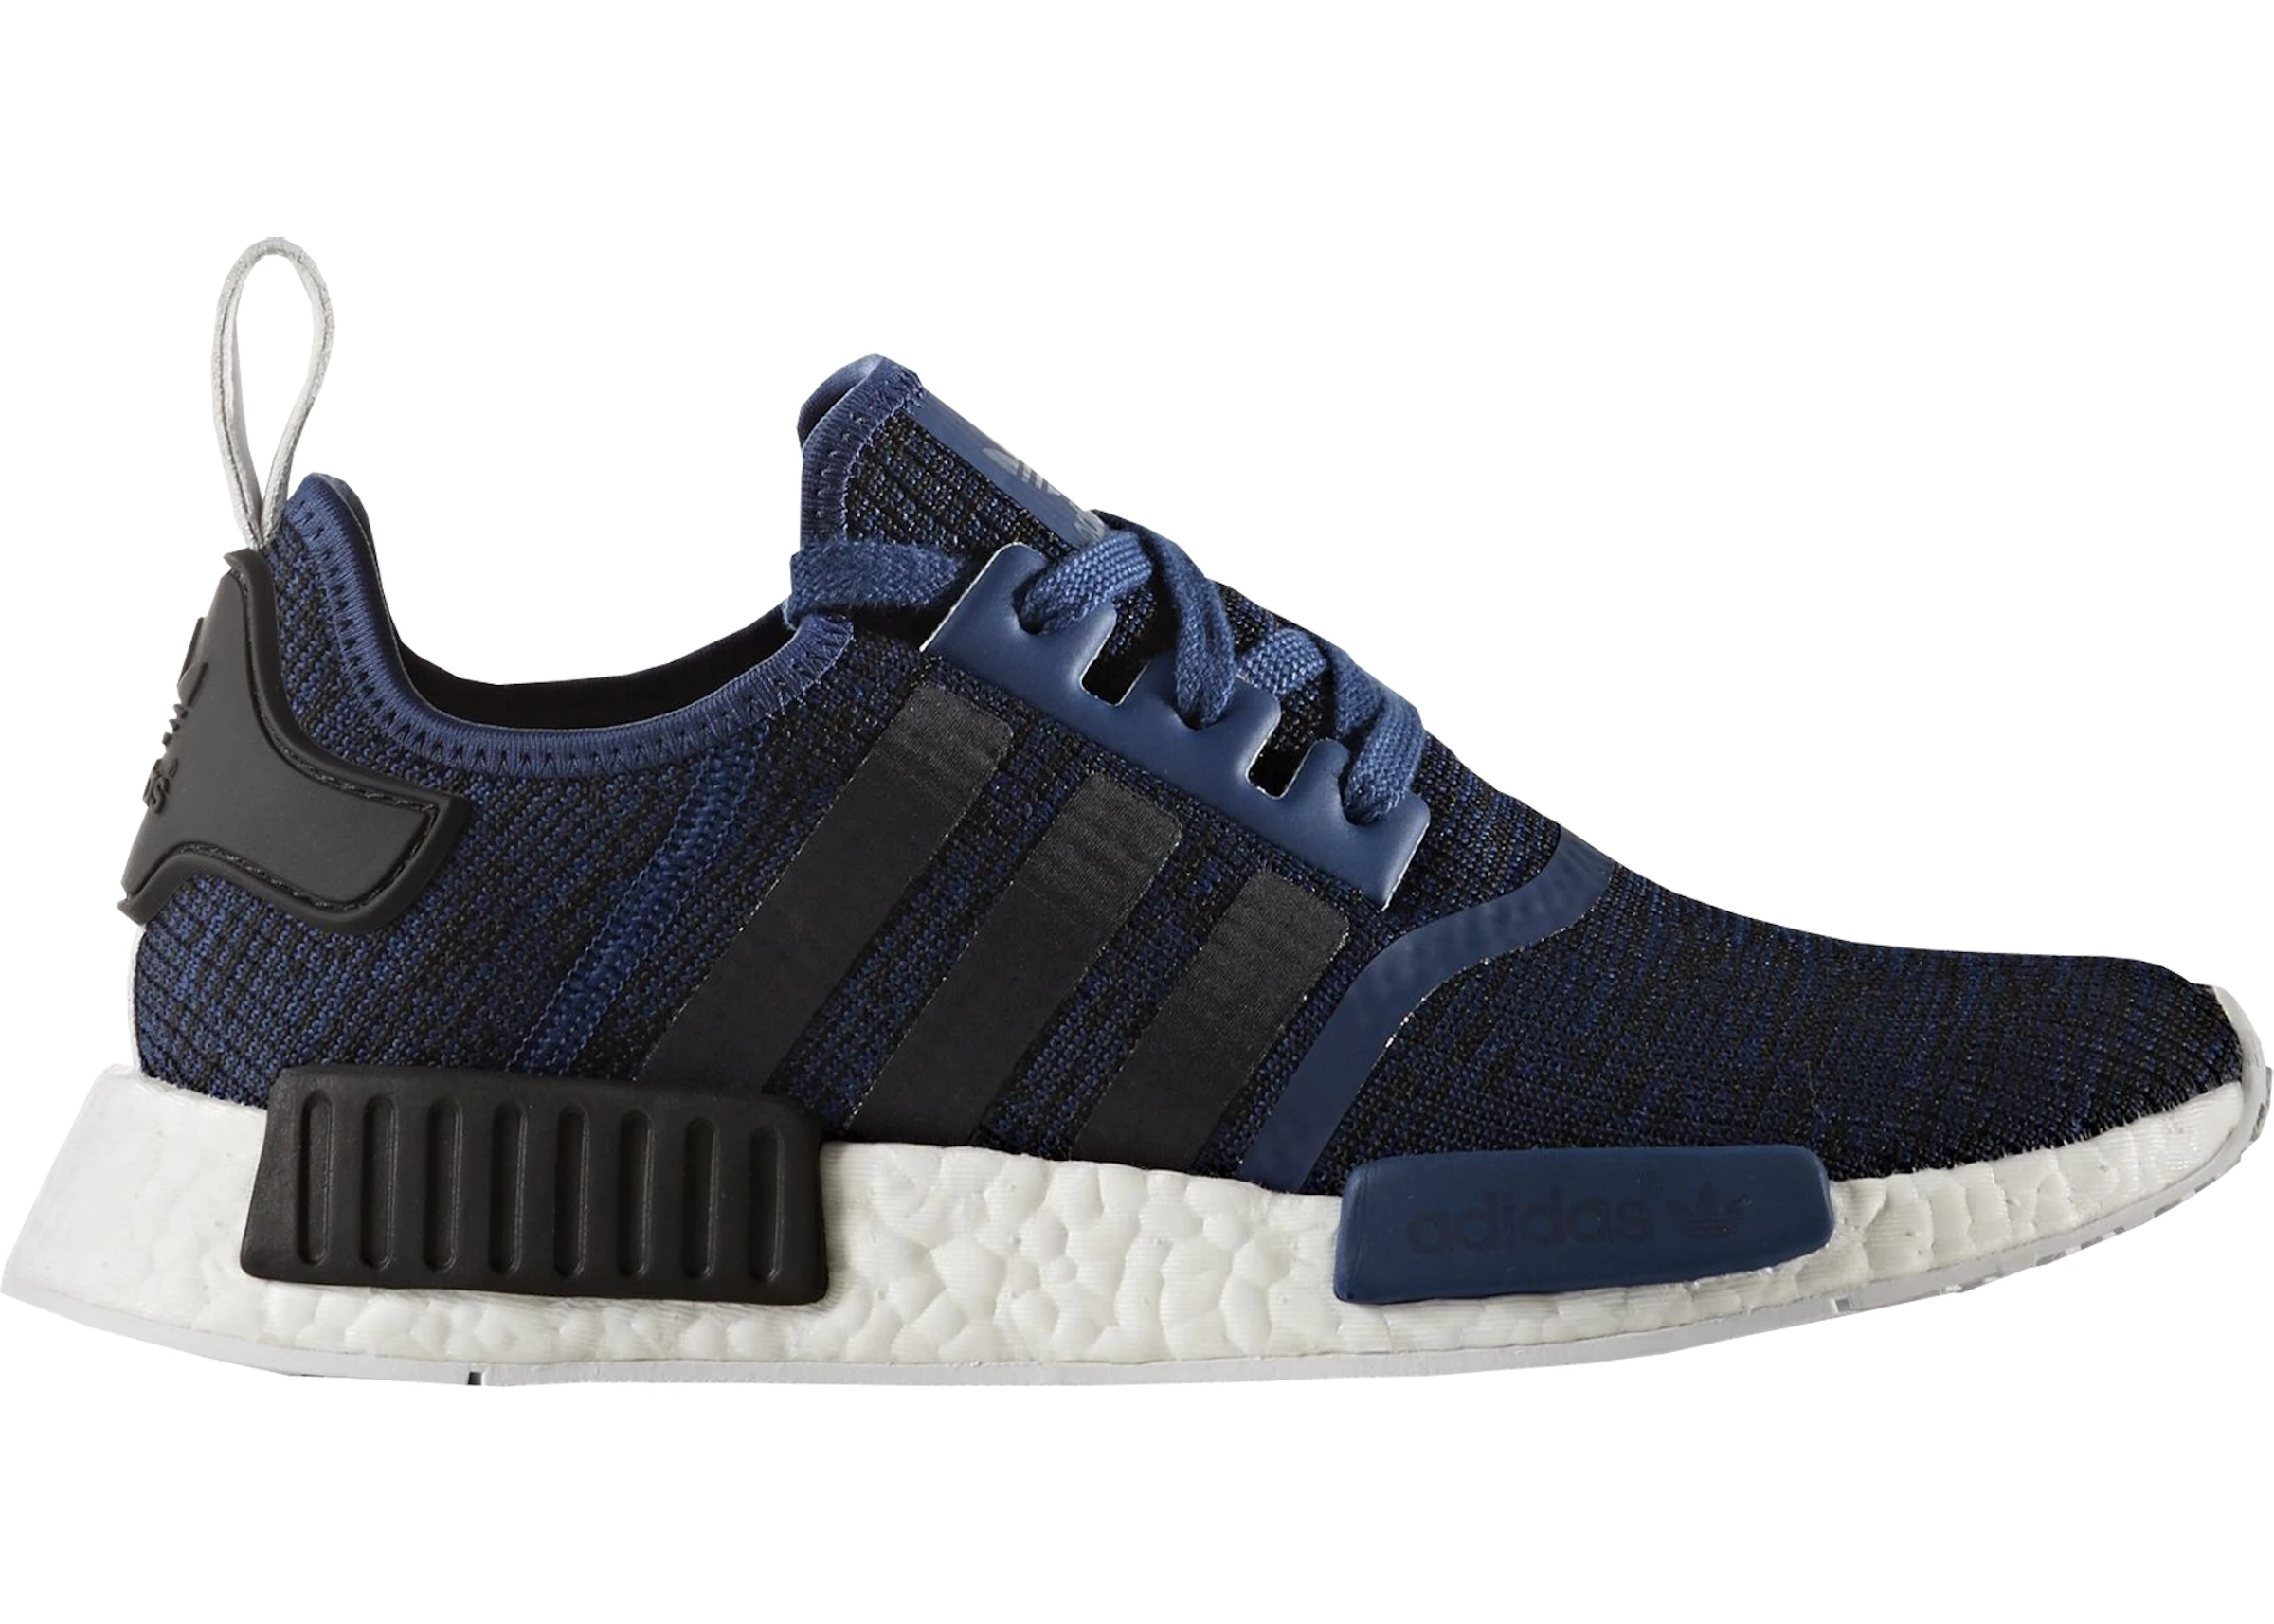 Revision pocket Bear adidas NMD R1 Mystery Blue - BY2775 - US